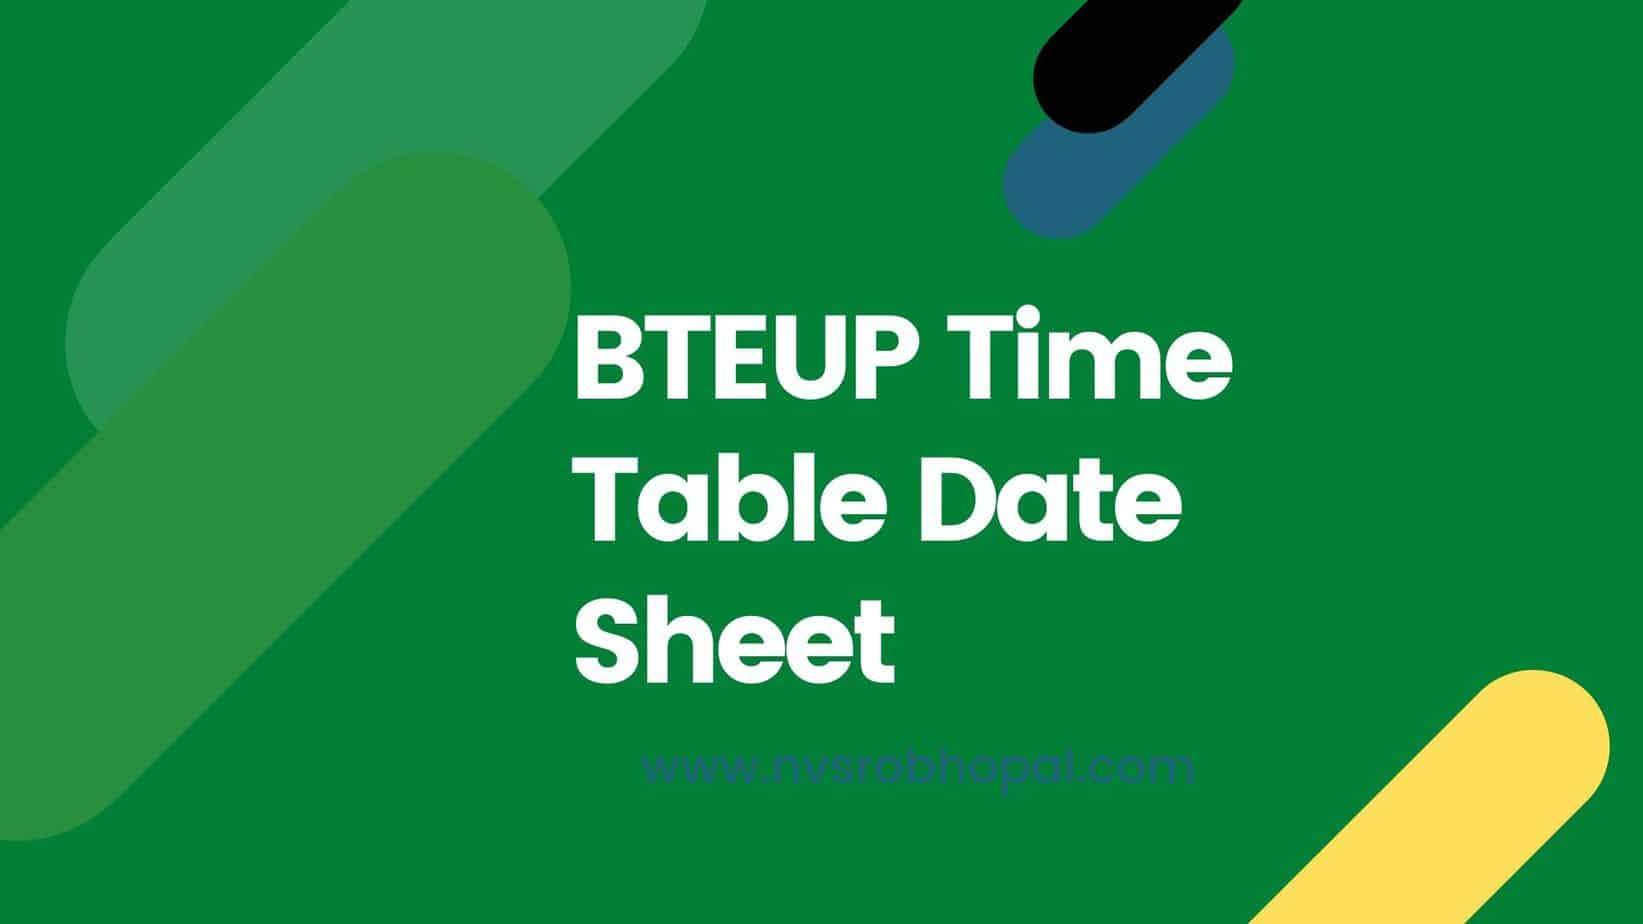 BTEUP-Time-Table-Date-Sheet